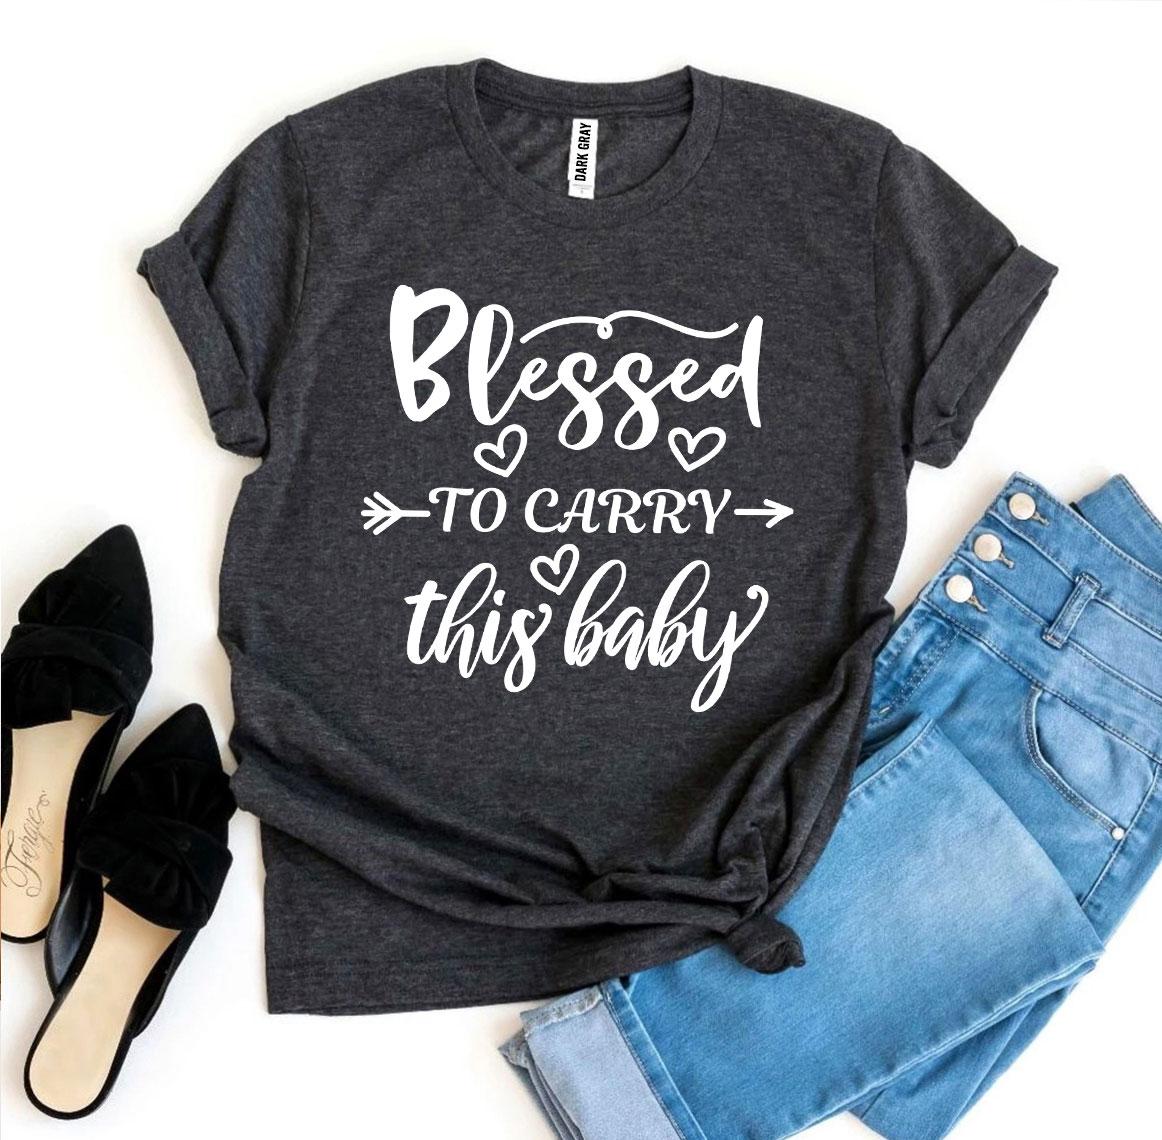 Blessed - T-Shirt